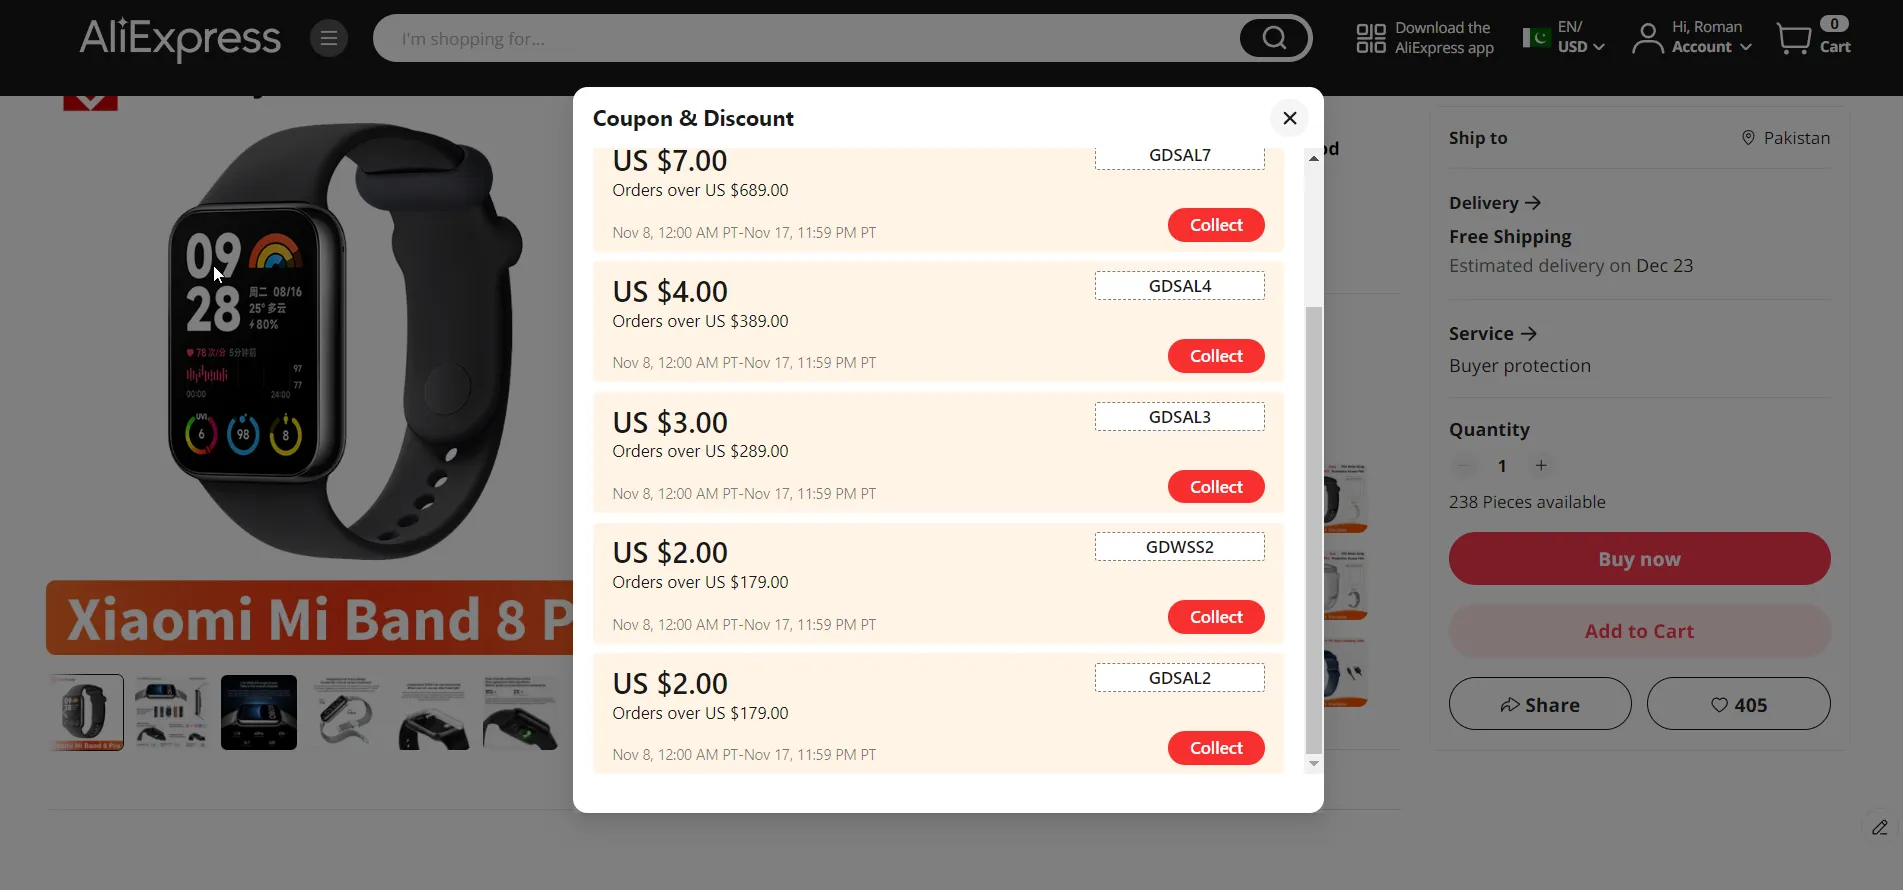 Aliexpress 11.11 in store coupon codes